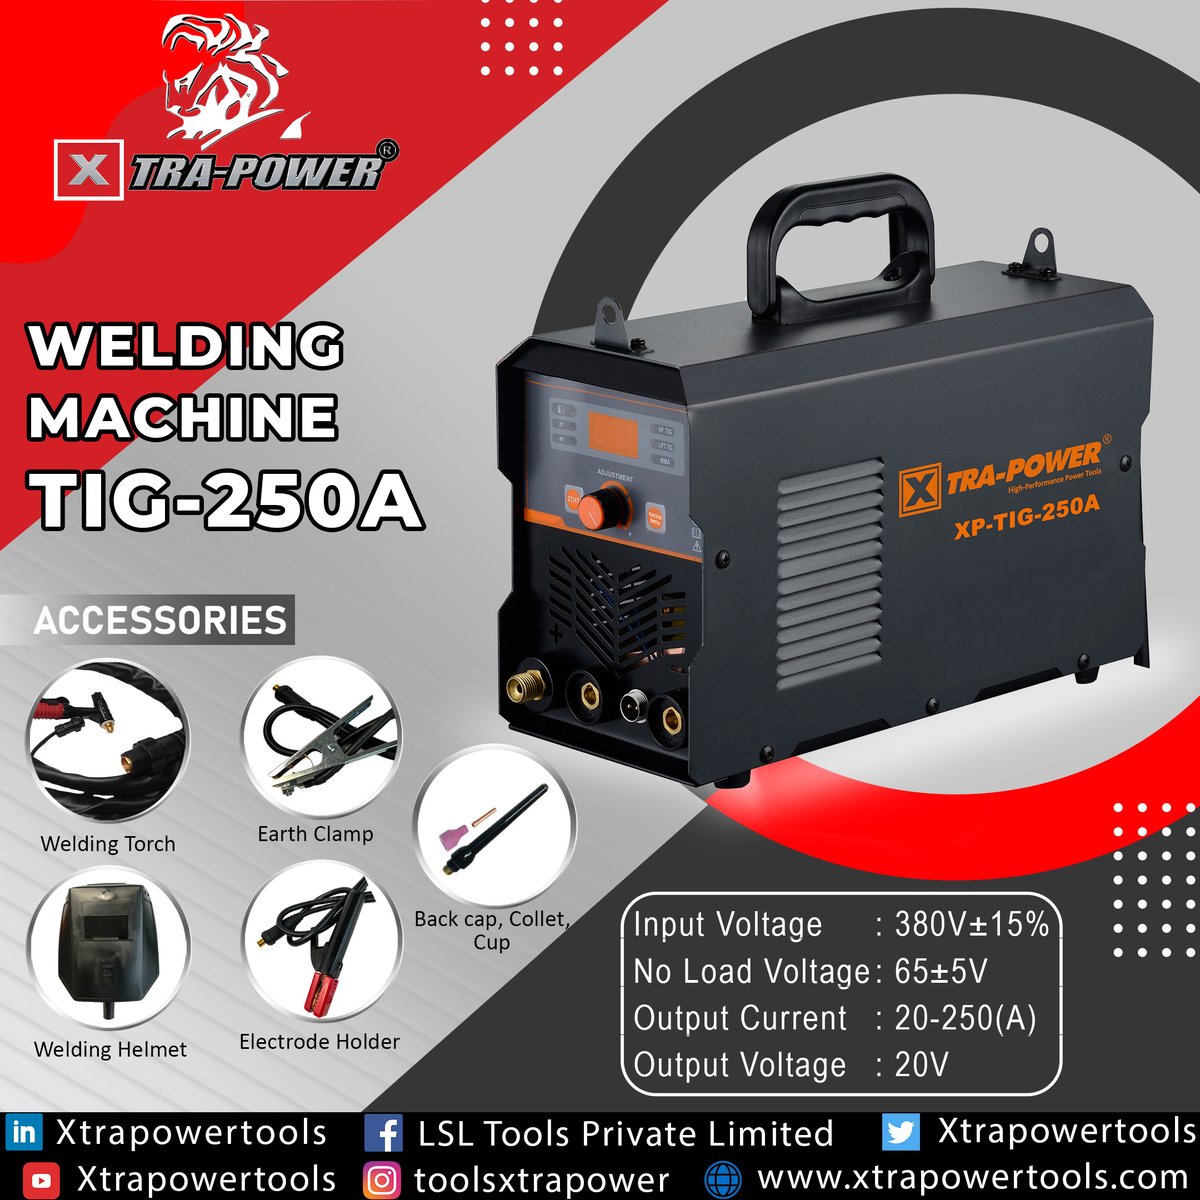 XTRA-POWER TIG 250A with an input power capacity of 9.1 KW for welding. It is used for welding wagons, bike frames, lawnmowers, door handles, fenders, and more.
#weldingmachine #tigwelding #powertools #weldinginspection #xtrapowertools #XTRAPOWER #lsltools